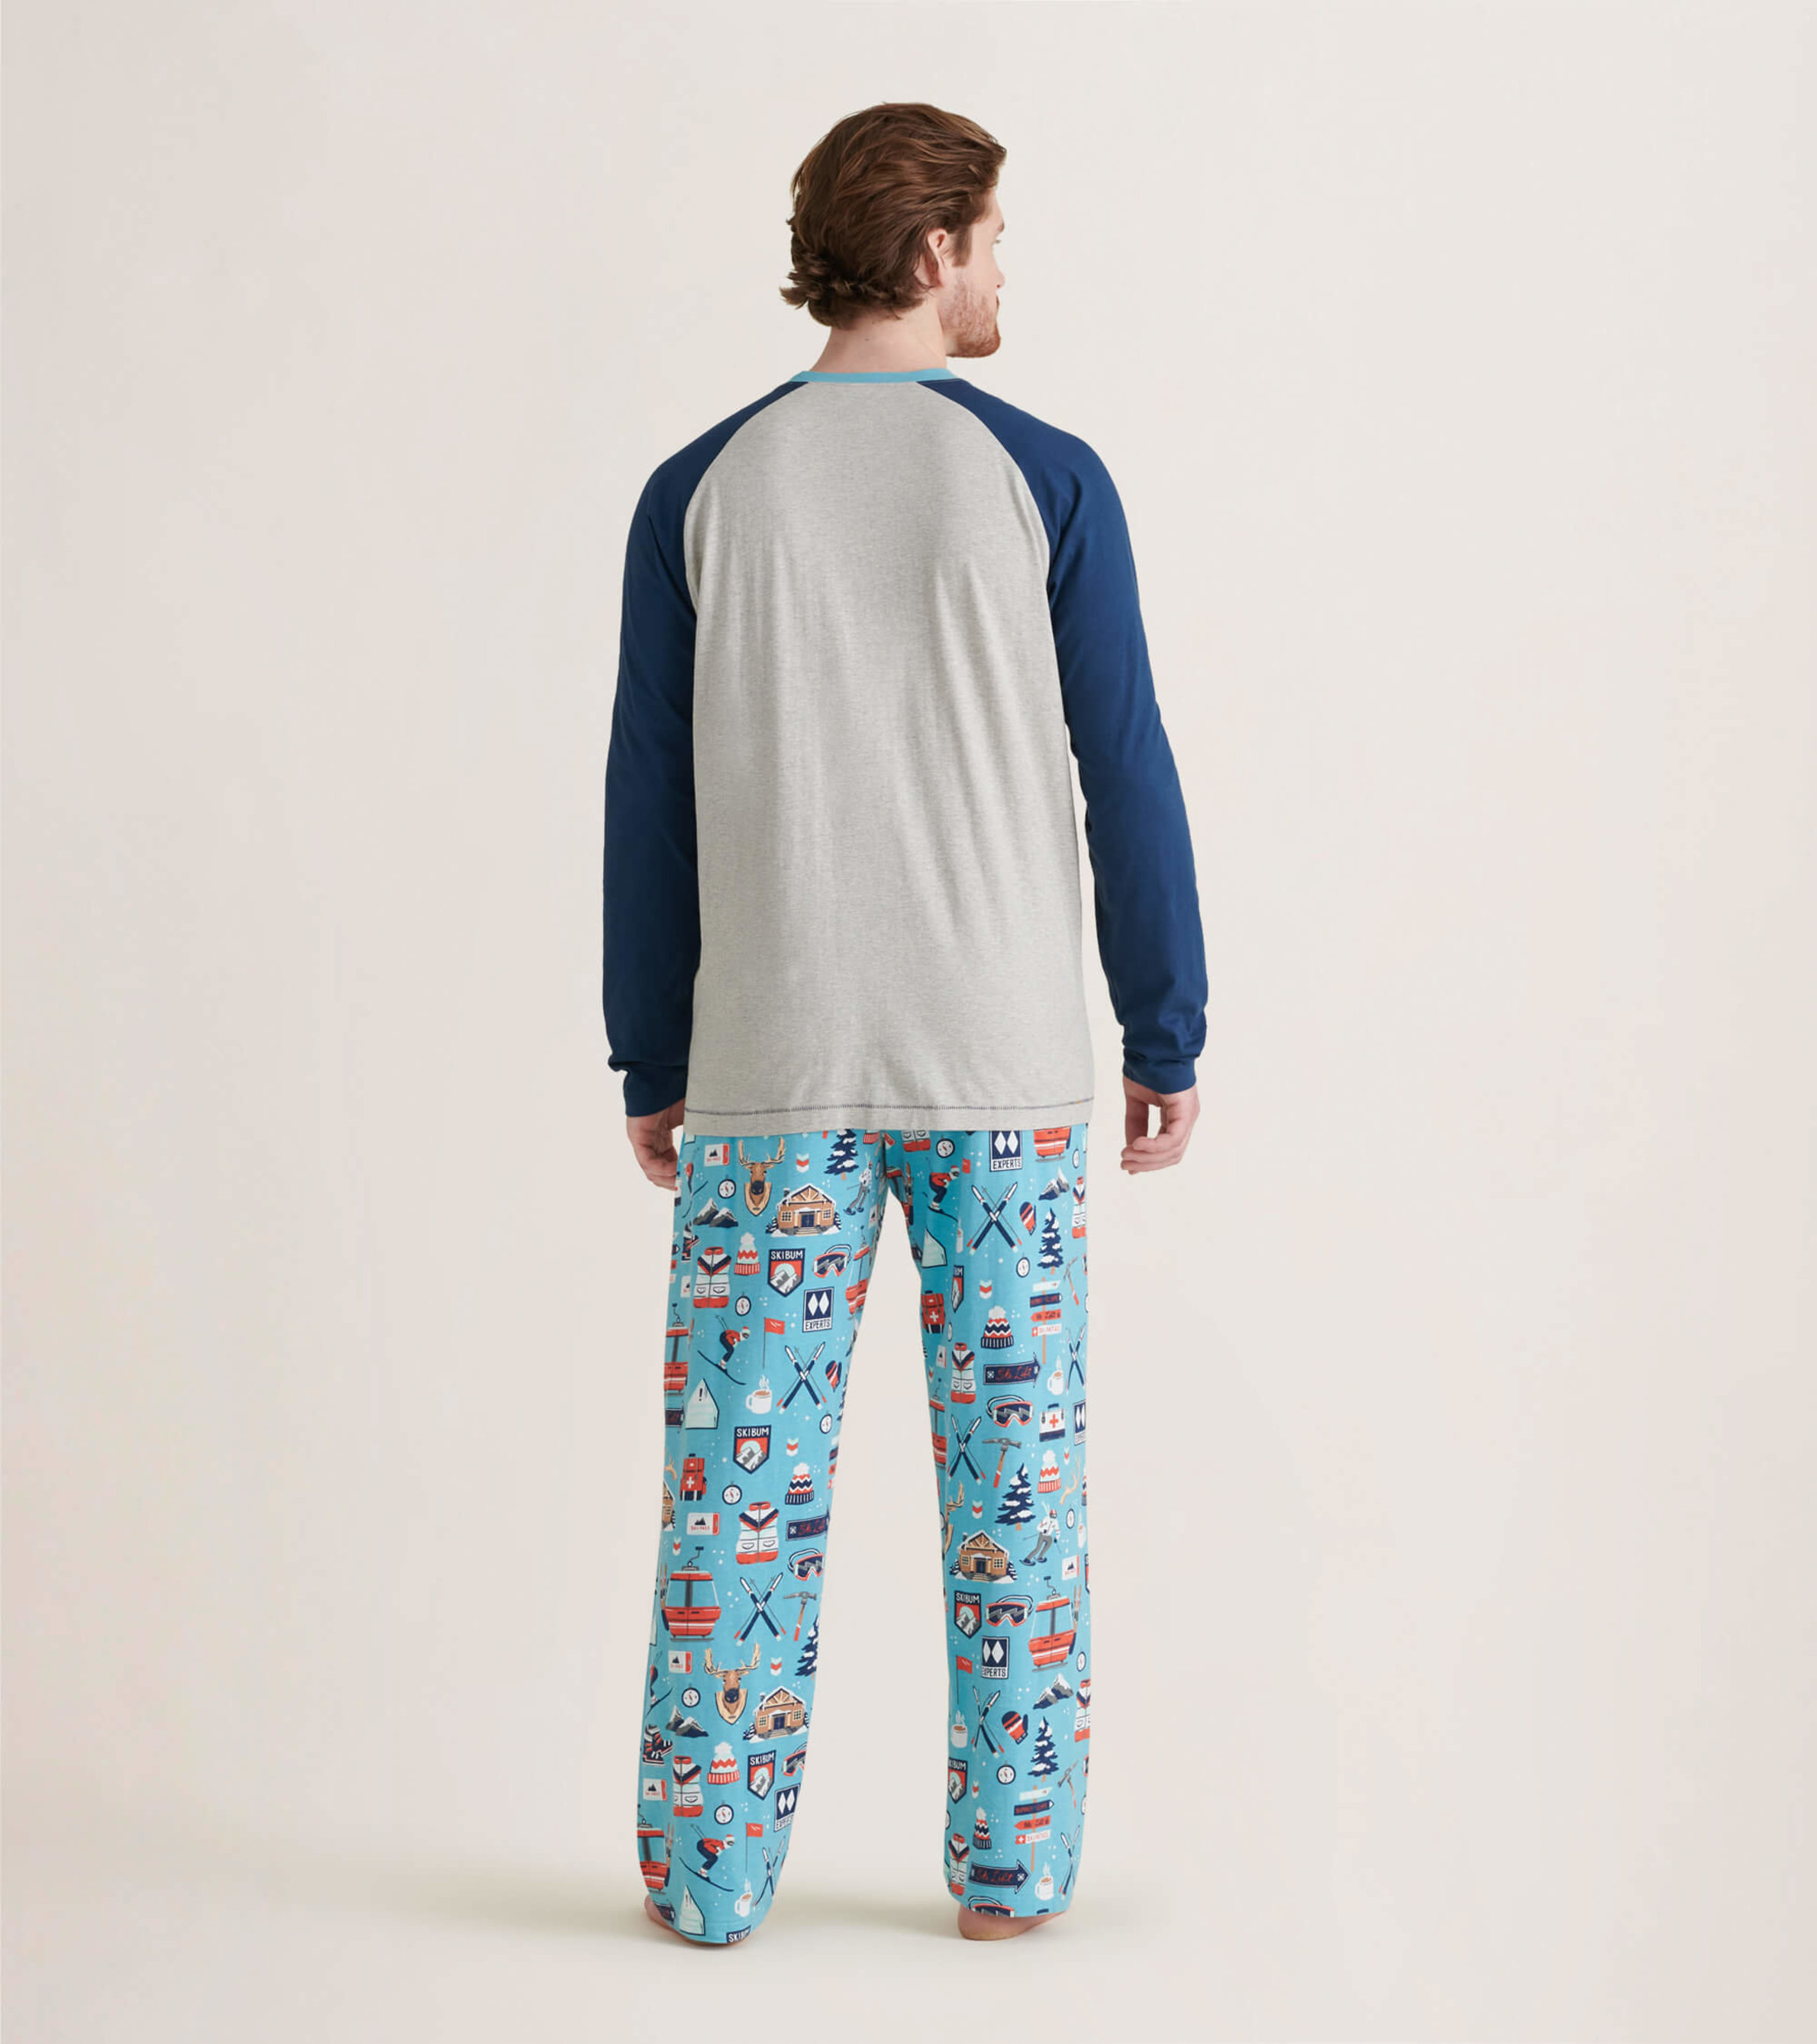 Wild About Christmas Men's Jersey Pajama Pants - Little Blue House CA